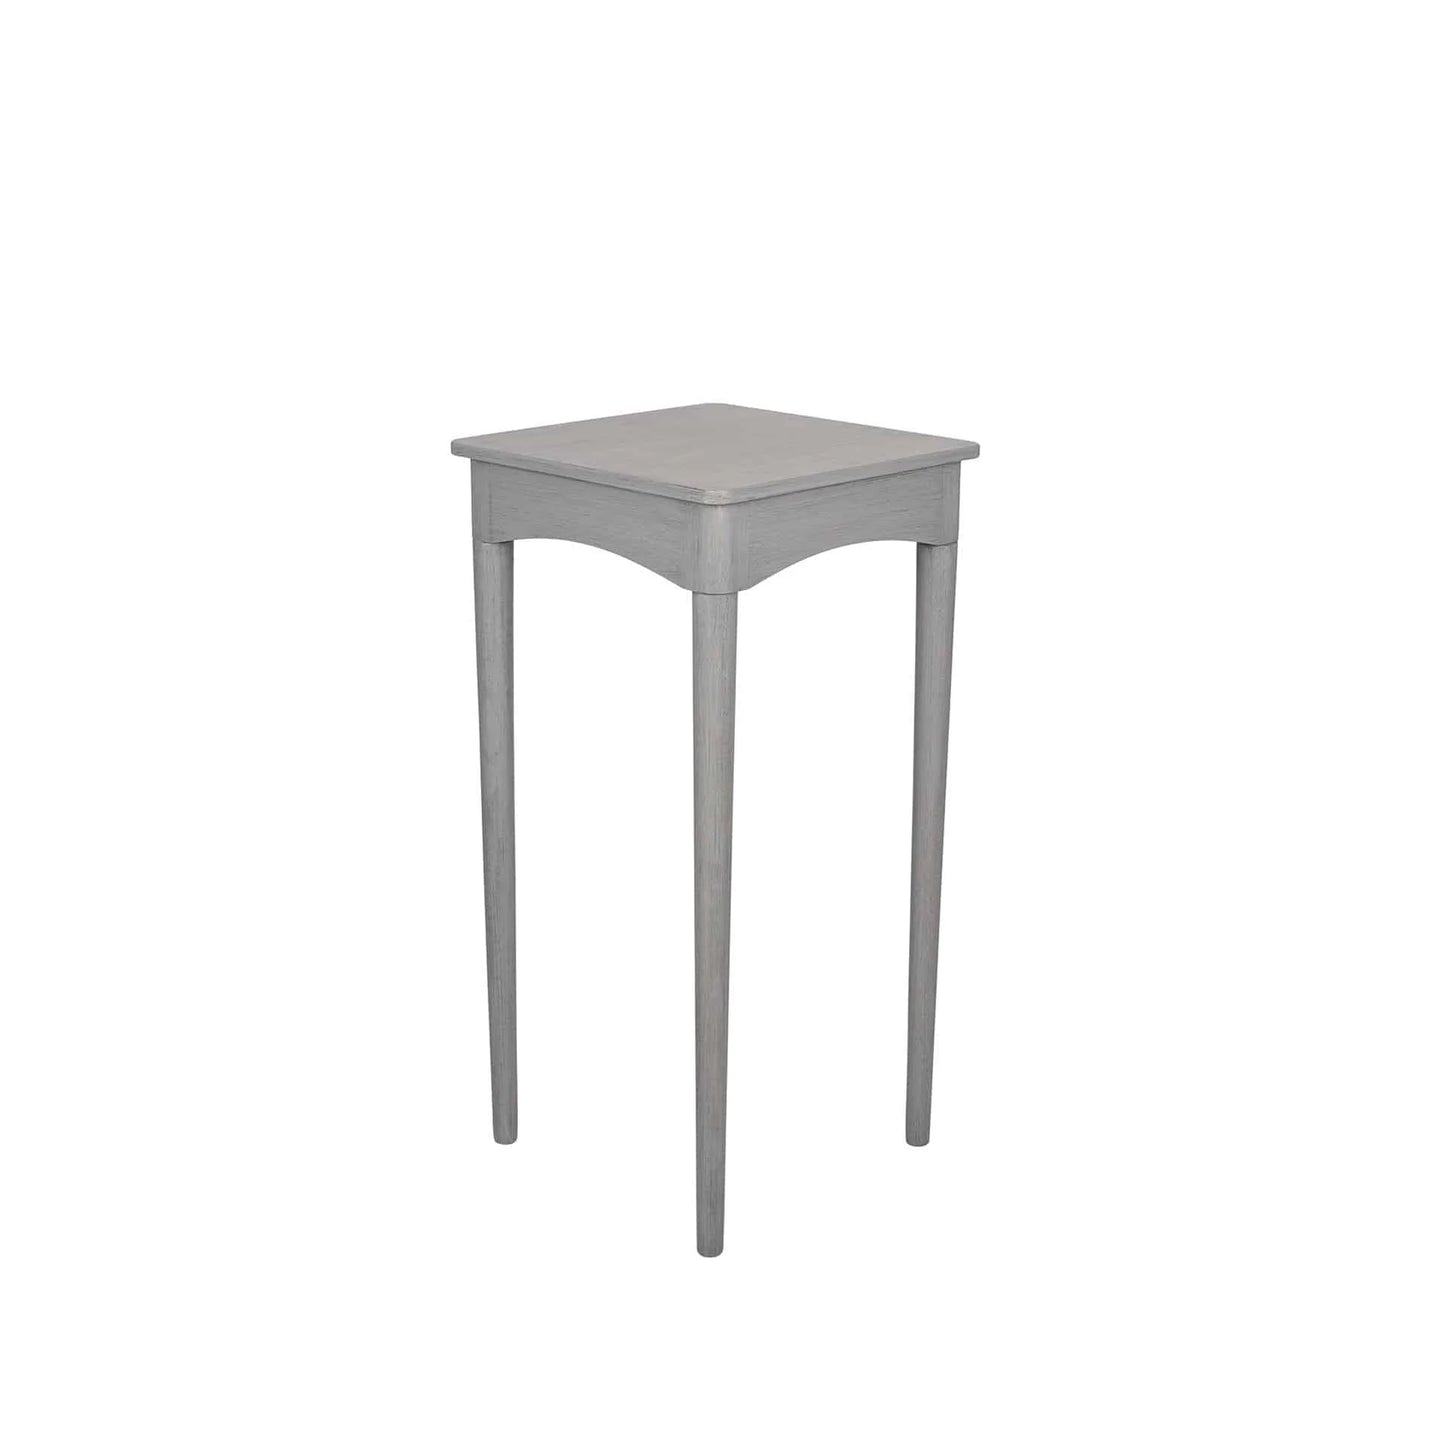 Dark Grey Pine Wood Square Occasional Table for sale - Woodcock and Cavendish